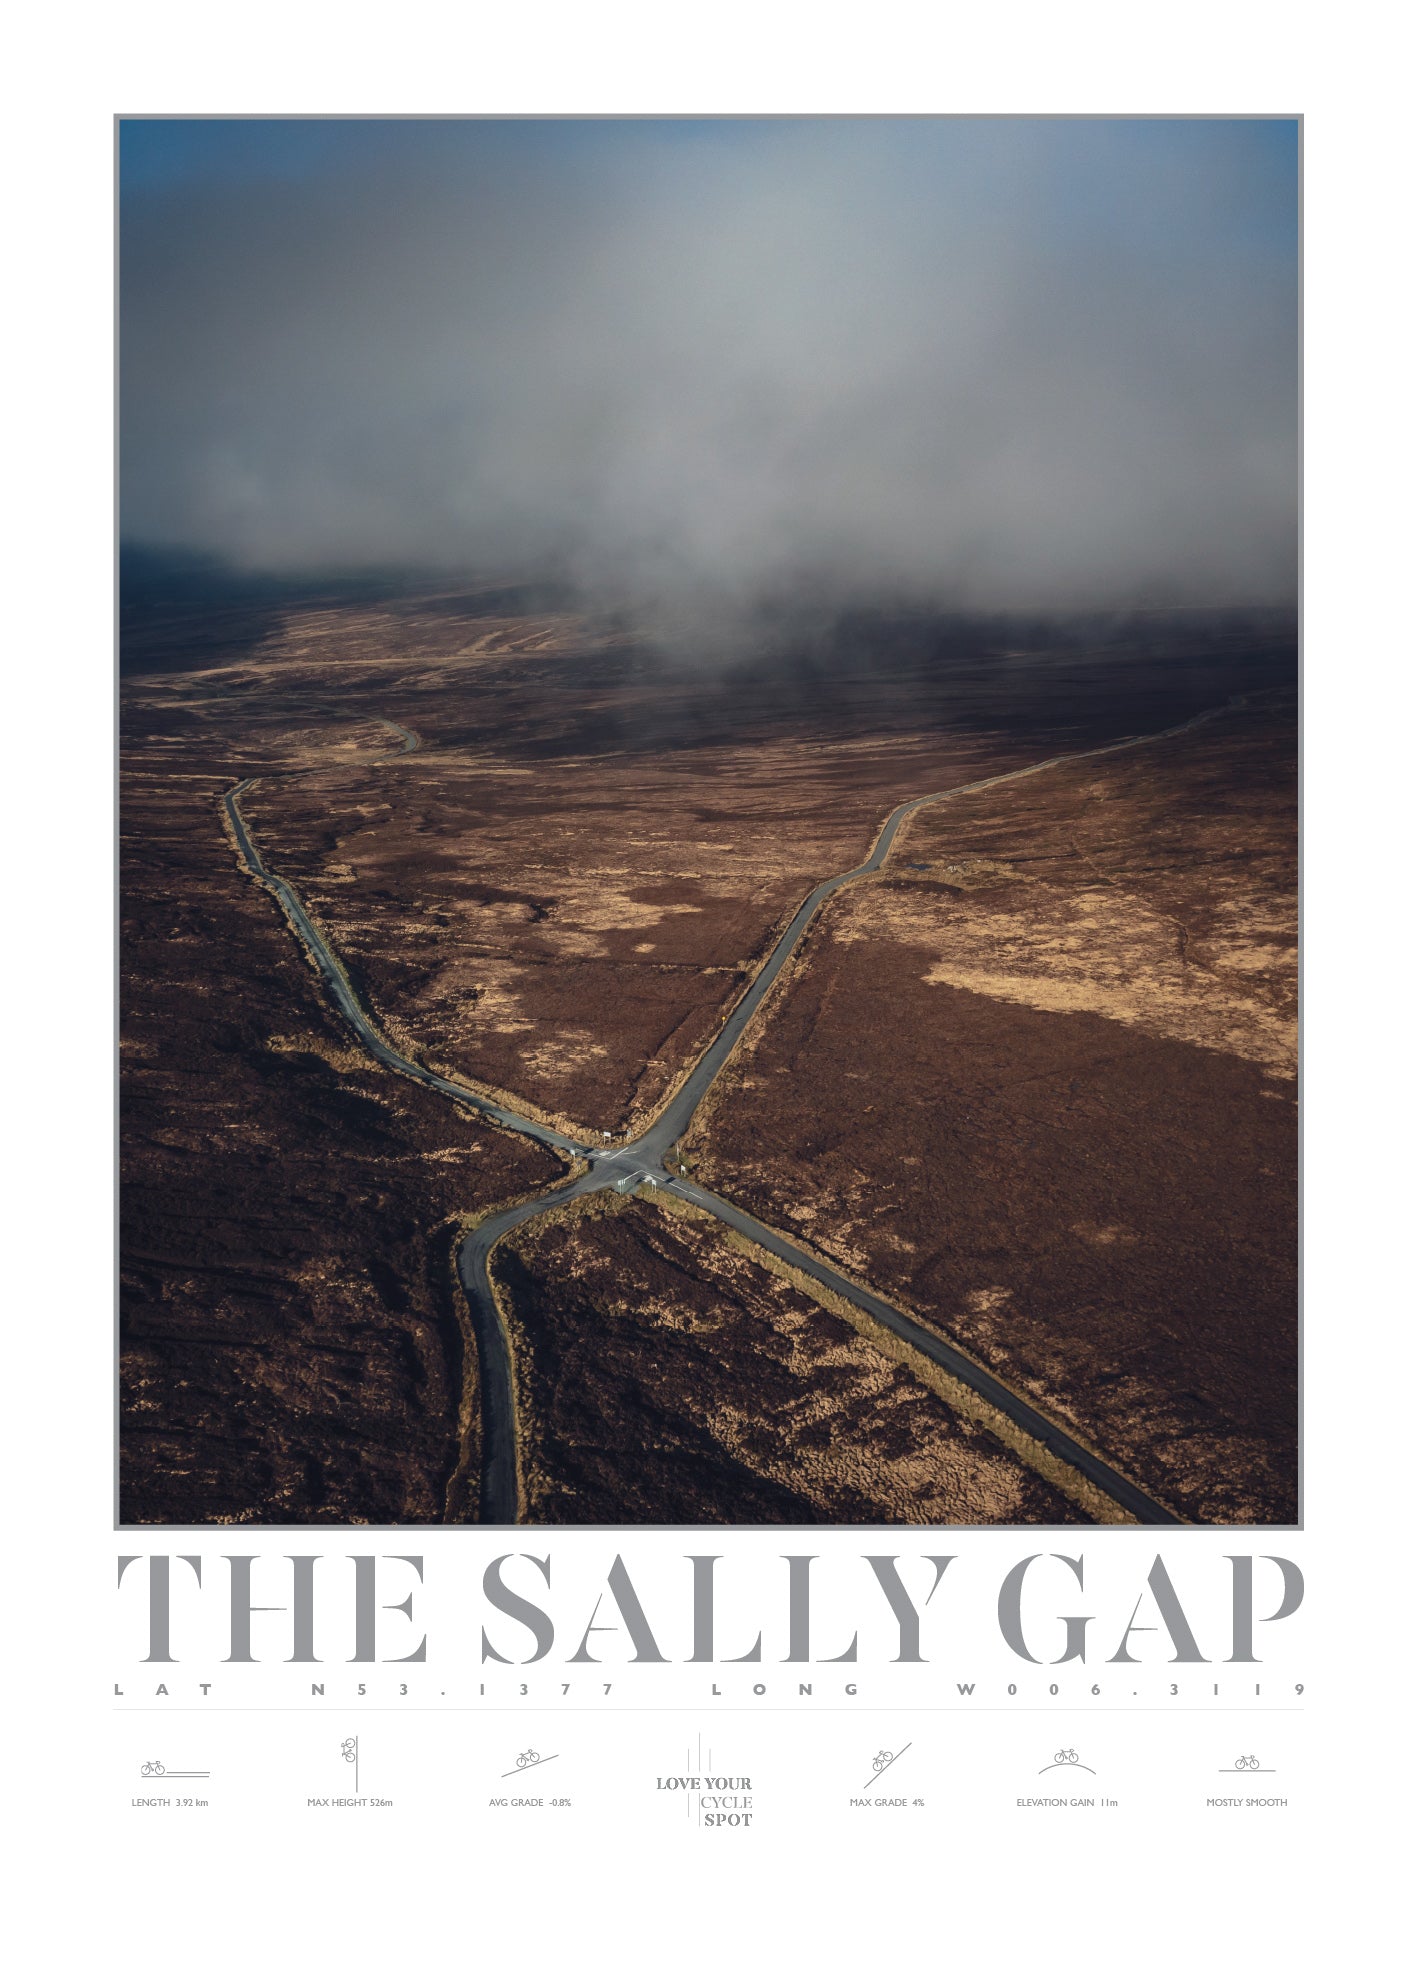 THE SALLY GAP CYCLE SPOT CO WICKLOW